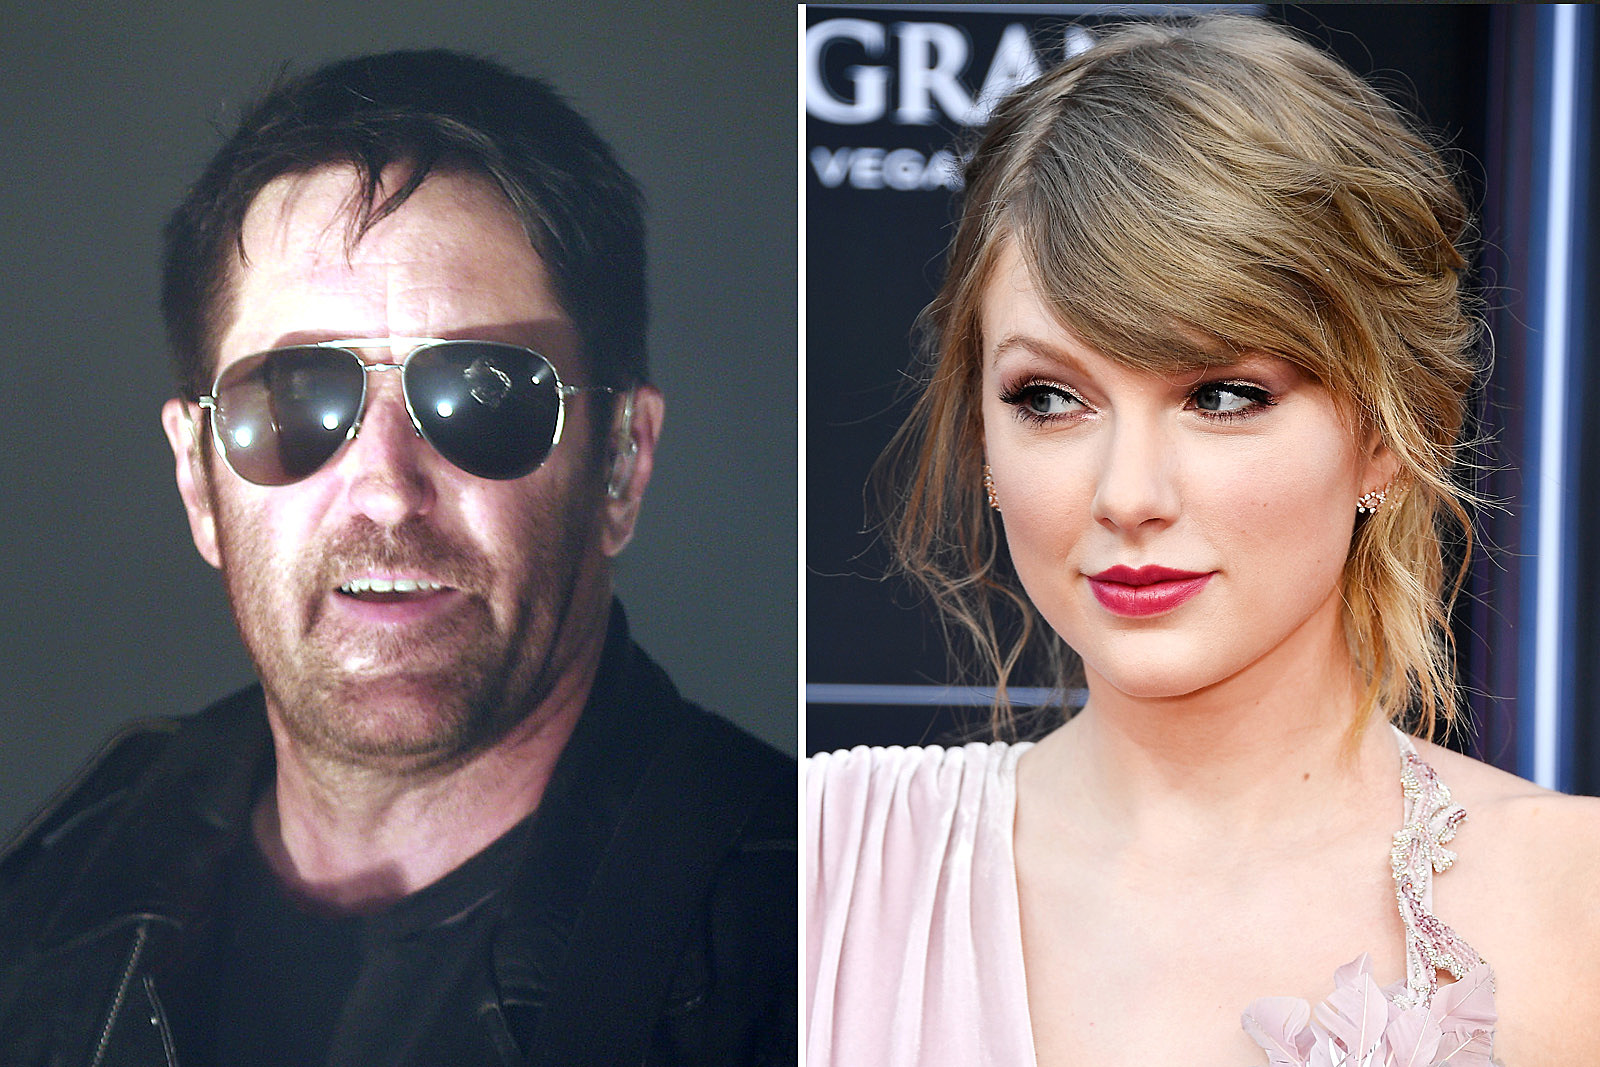 Taylor Swift Celebrity Blowjob - Trent Reznor Slams 'Taylor Swifts' Who Keep Politics Out of Music